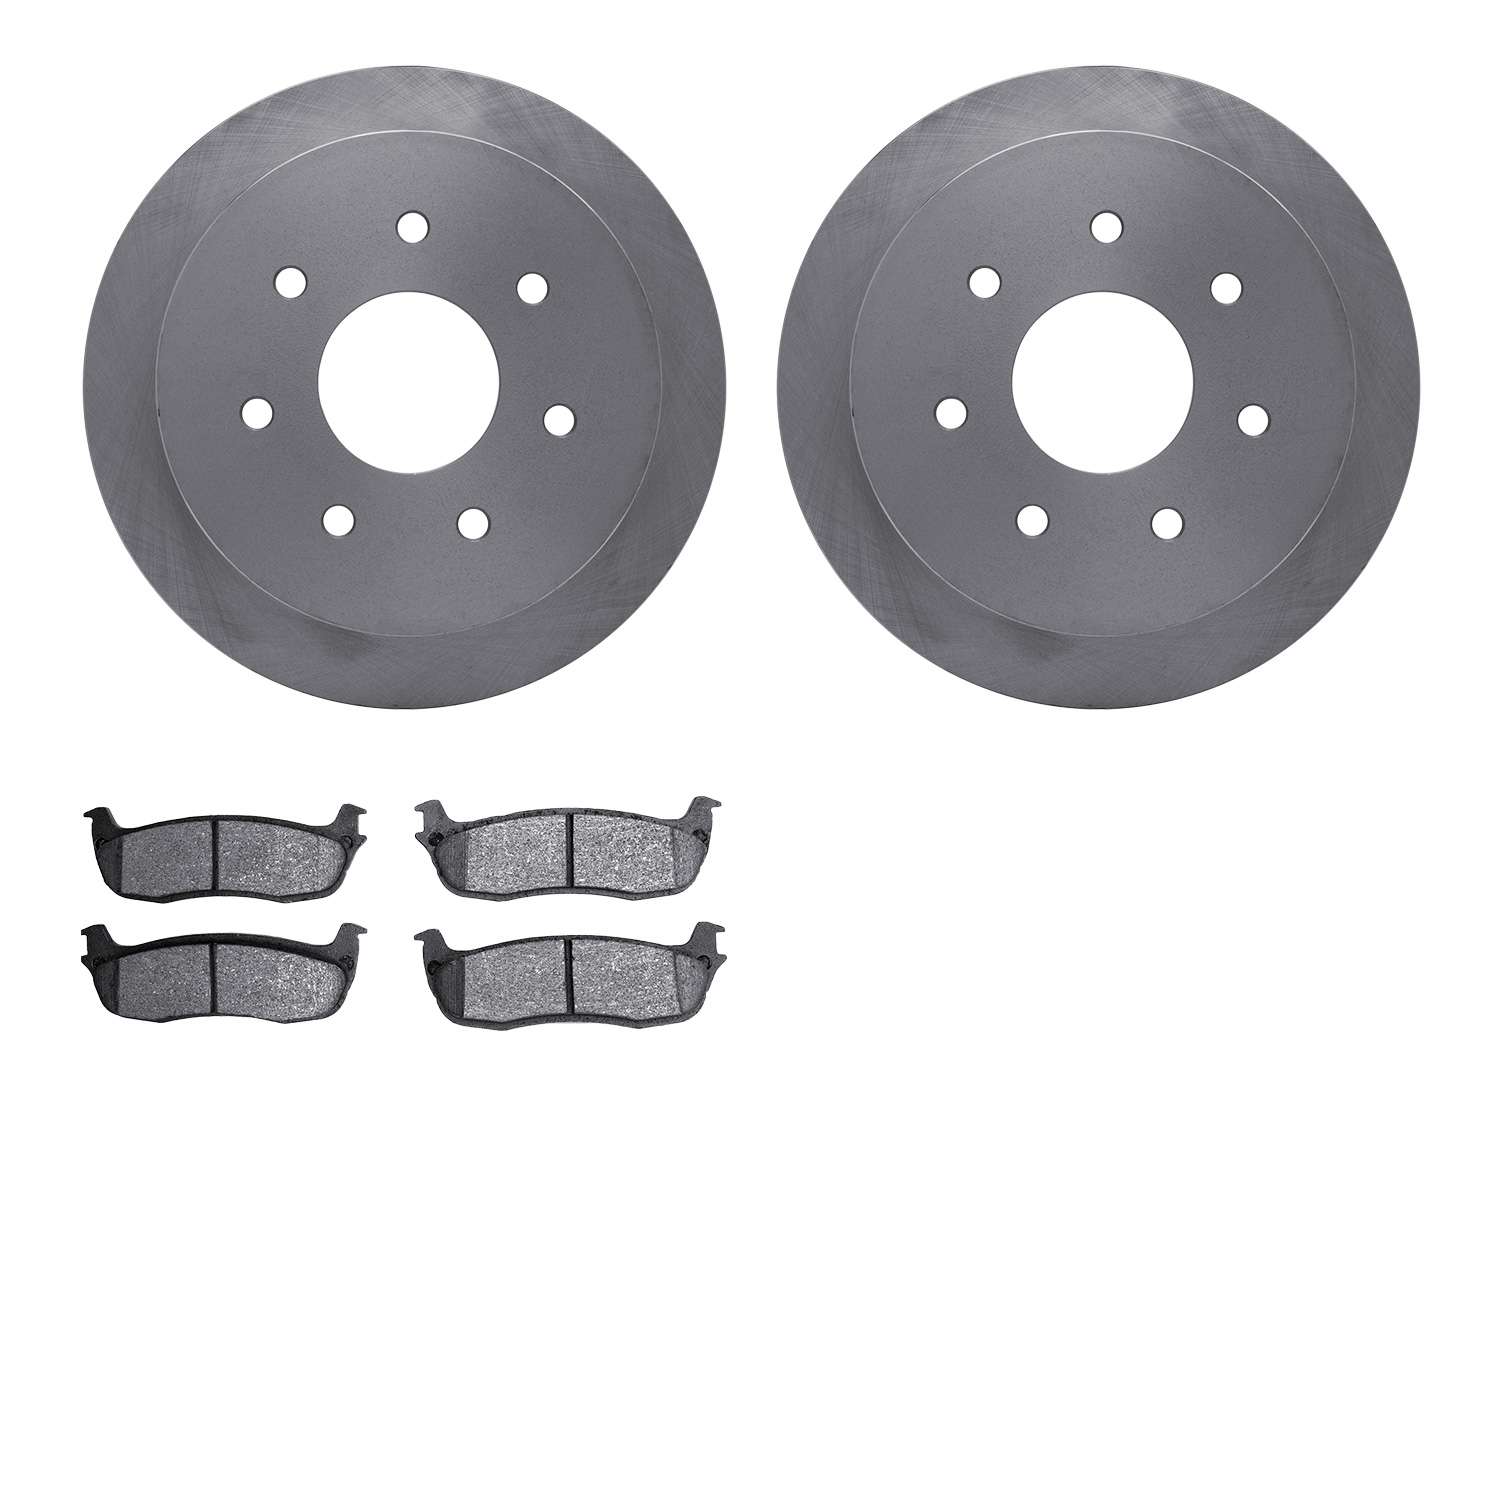 6402-54107 Brake Rotors with Ultimate-Duty Brake Pads, 1997-2004 Ford/Lincoln/Mercury/Mazda, Position: Rear